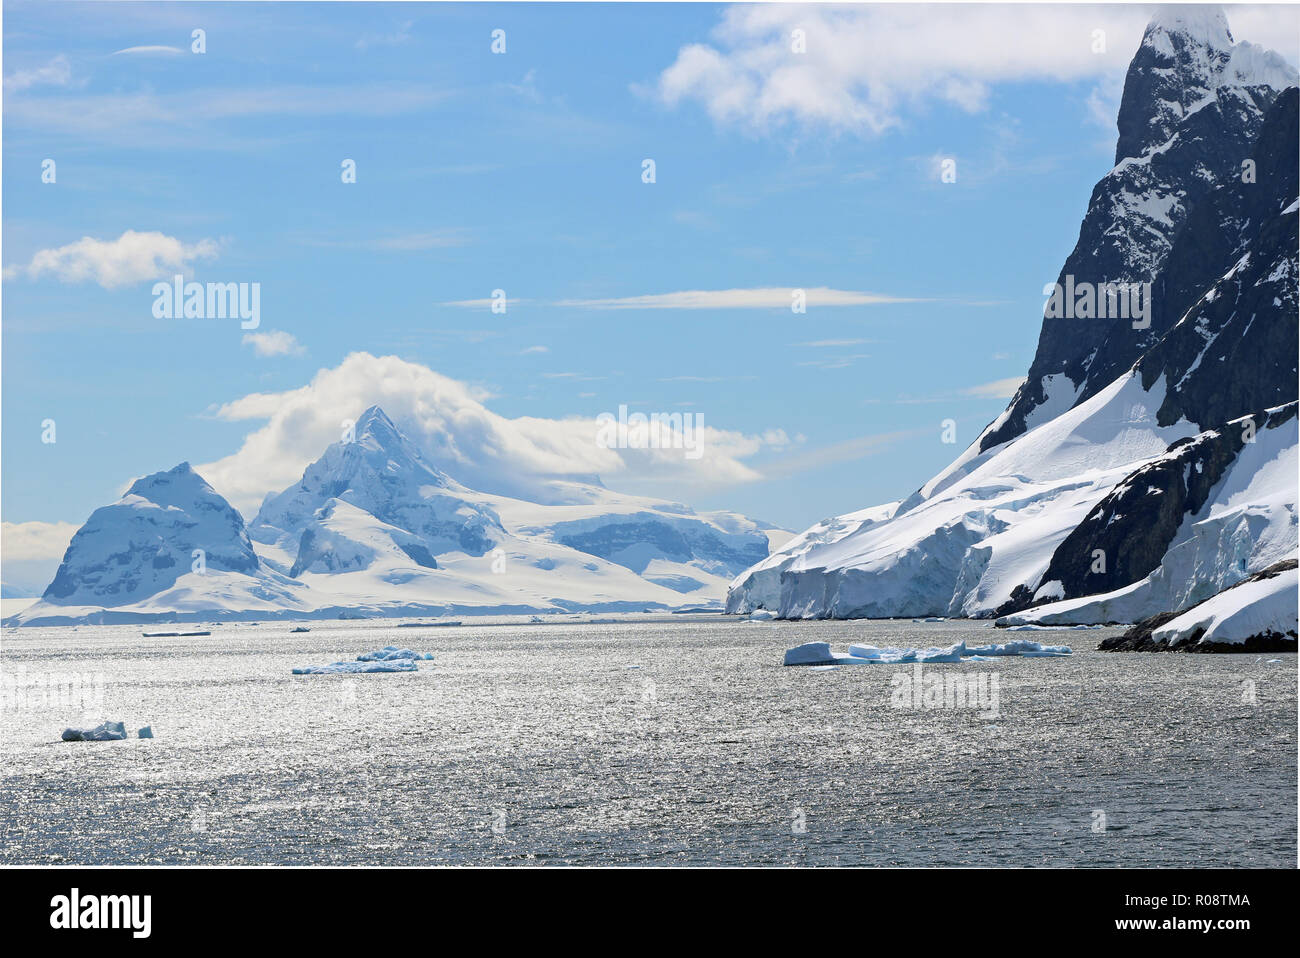 Shimmering snows of the peaks surrounding the glistening waters of the stunning Lemaire Channel, Antarctic Peninsula Stock Photo